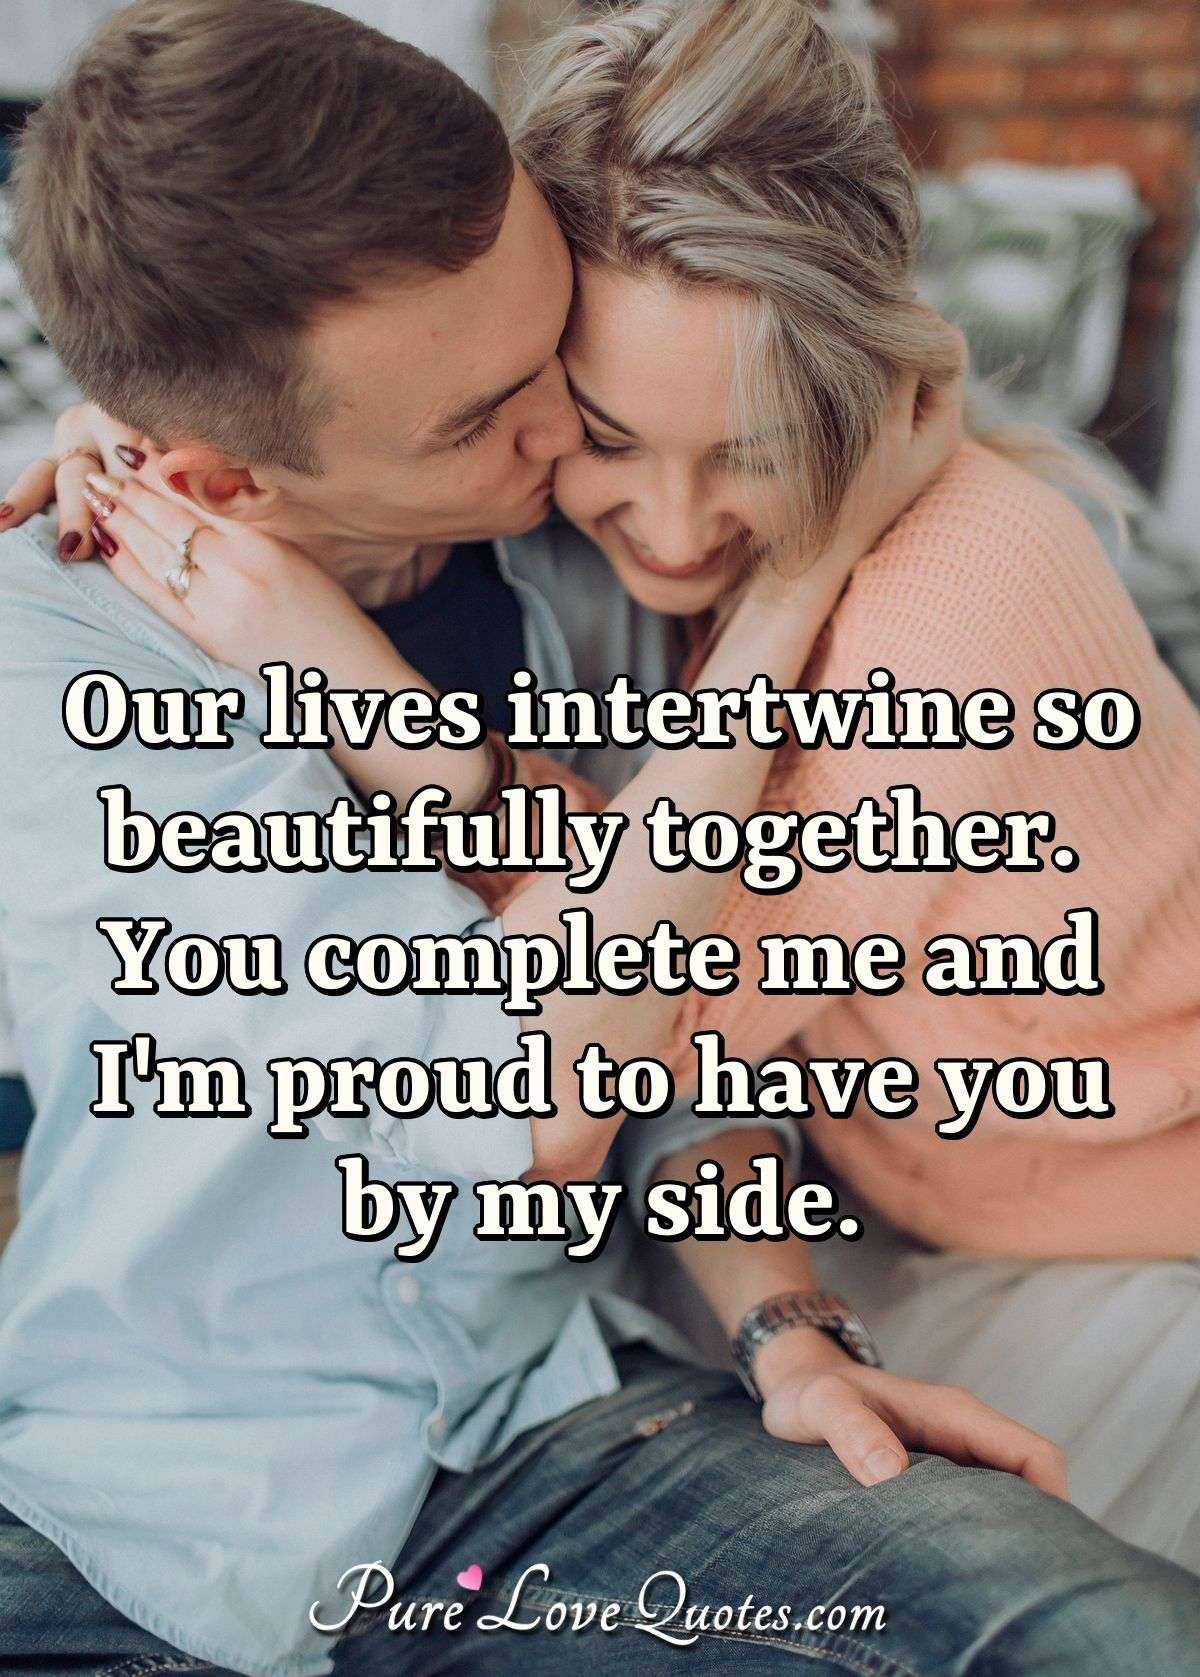 Our lives intertwine so beautifully together. You complete me and I'm proud to have you by my side. - Anonymous